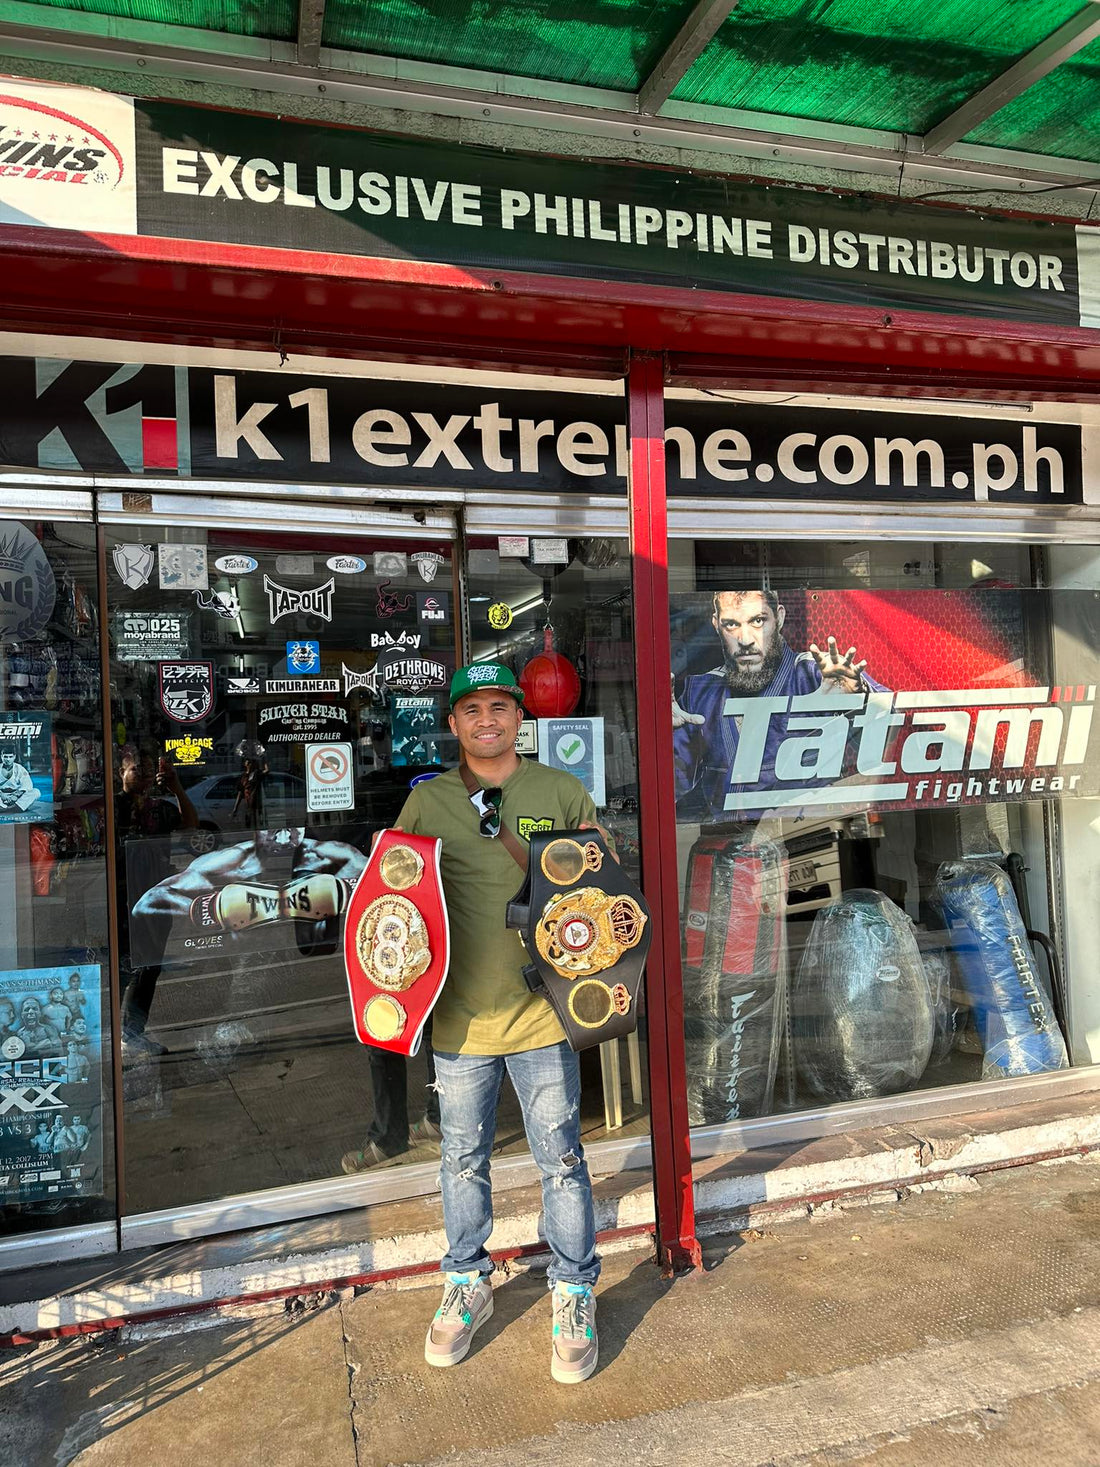 We are Honored to be graced by the presence of Unified Super Bantamweight Champion Marlon Tapales!